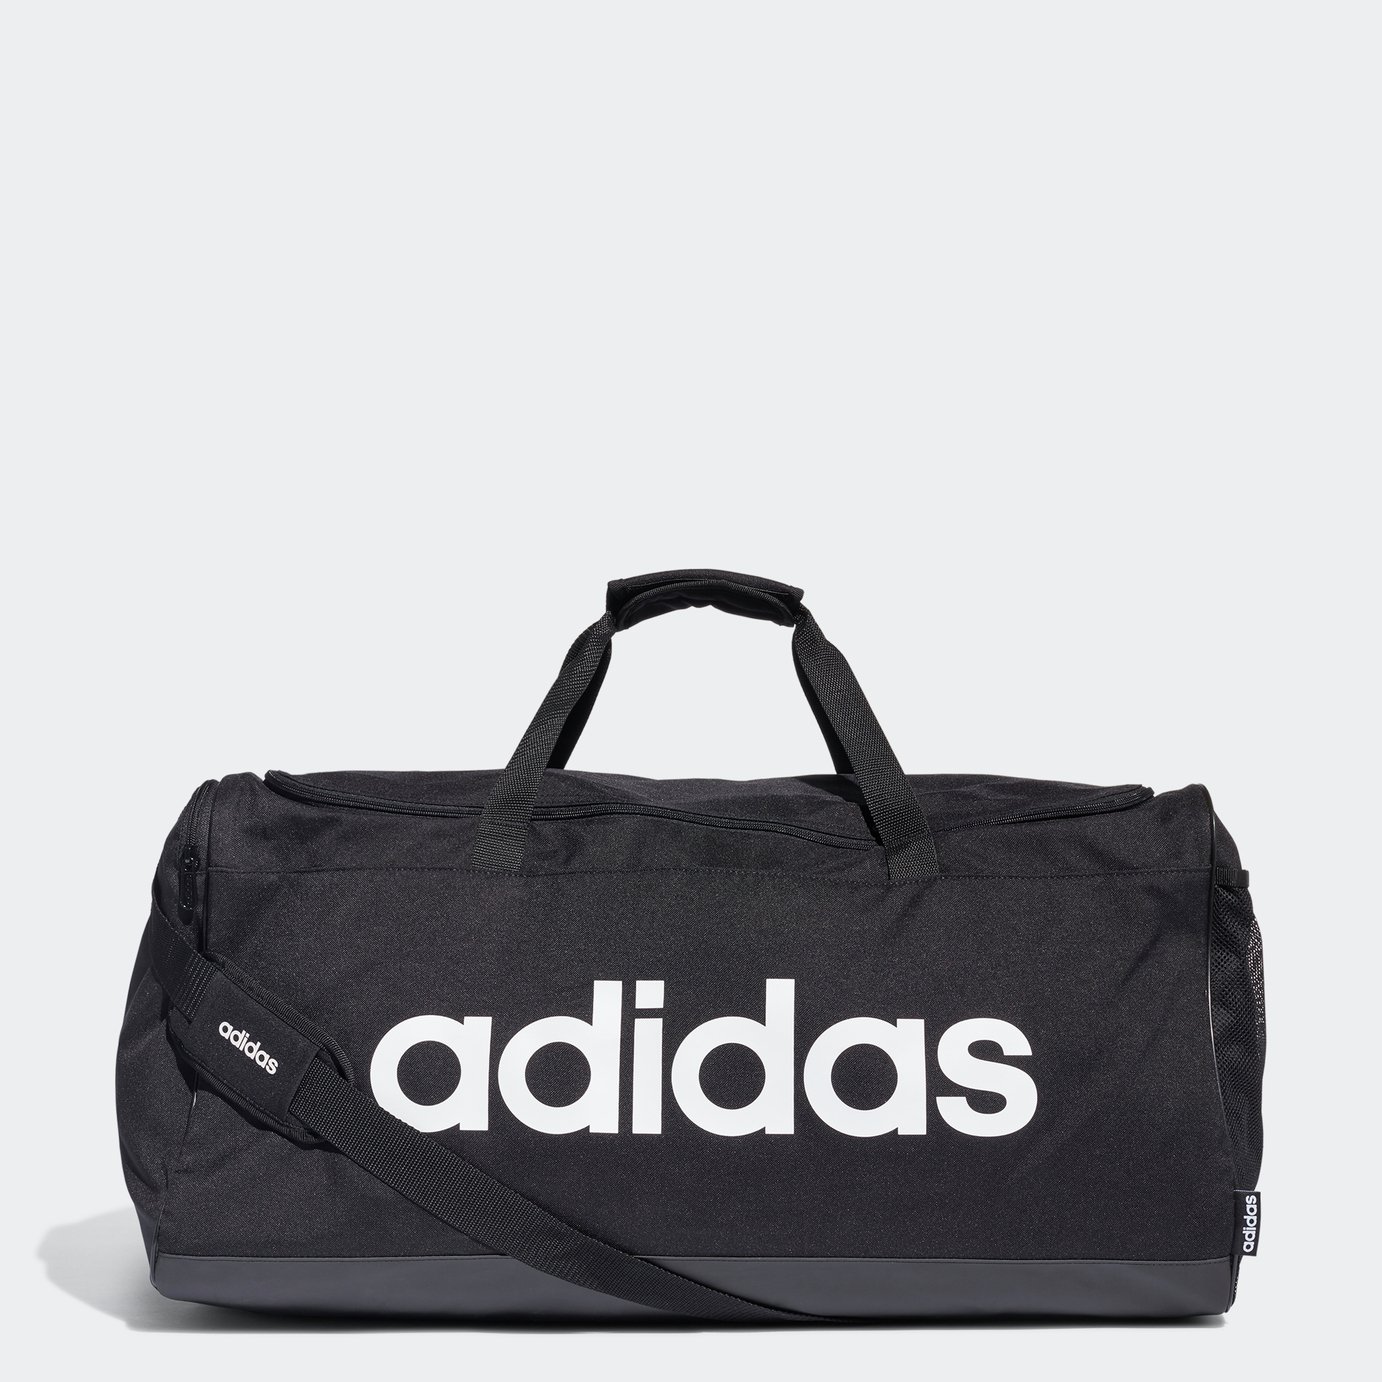 Adidas Linear Large Duffle Bag Review